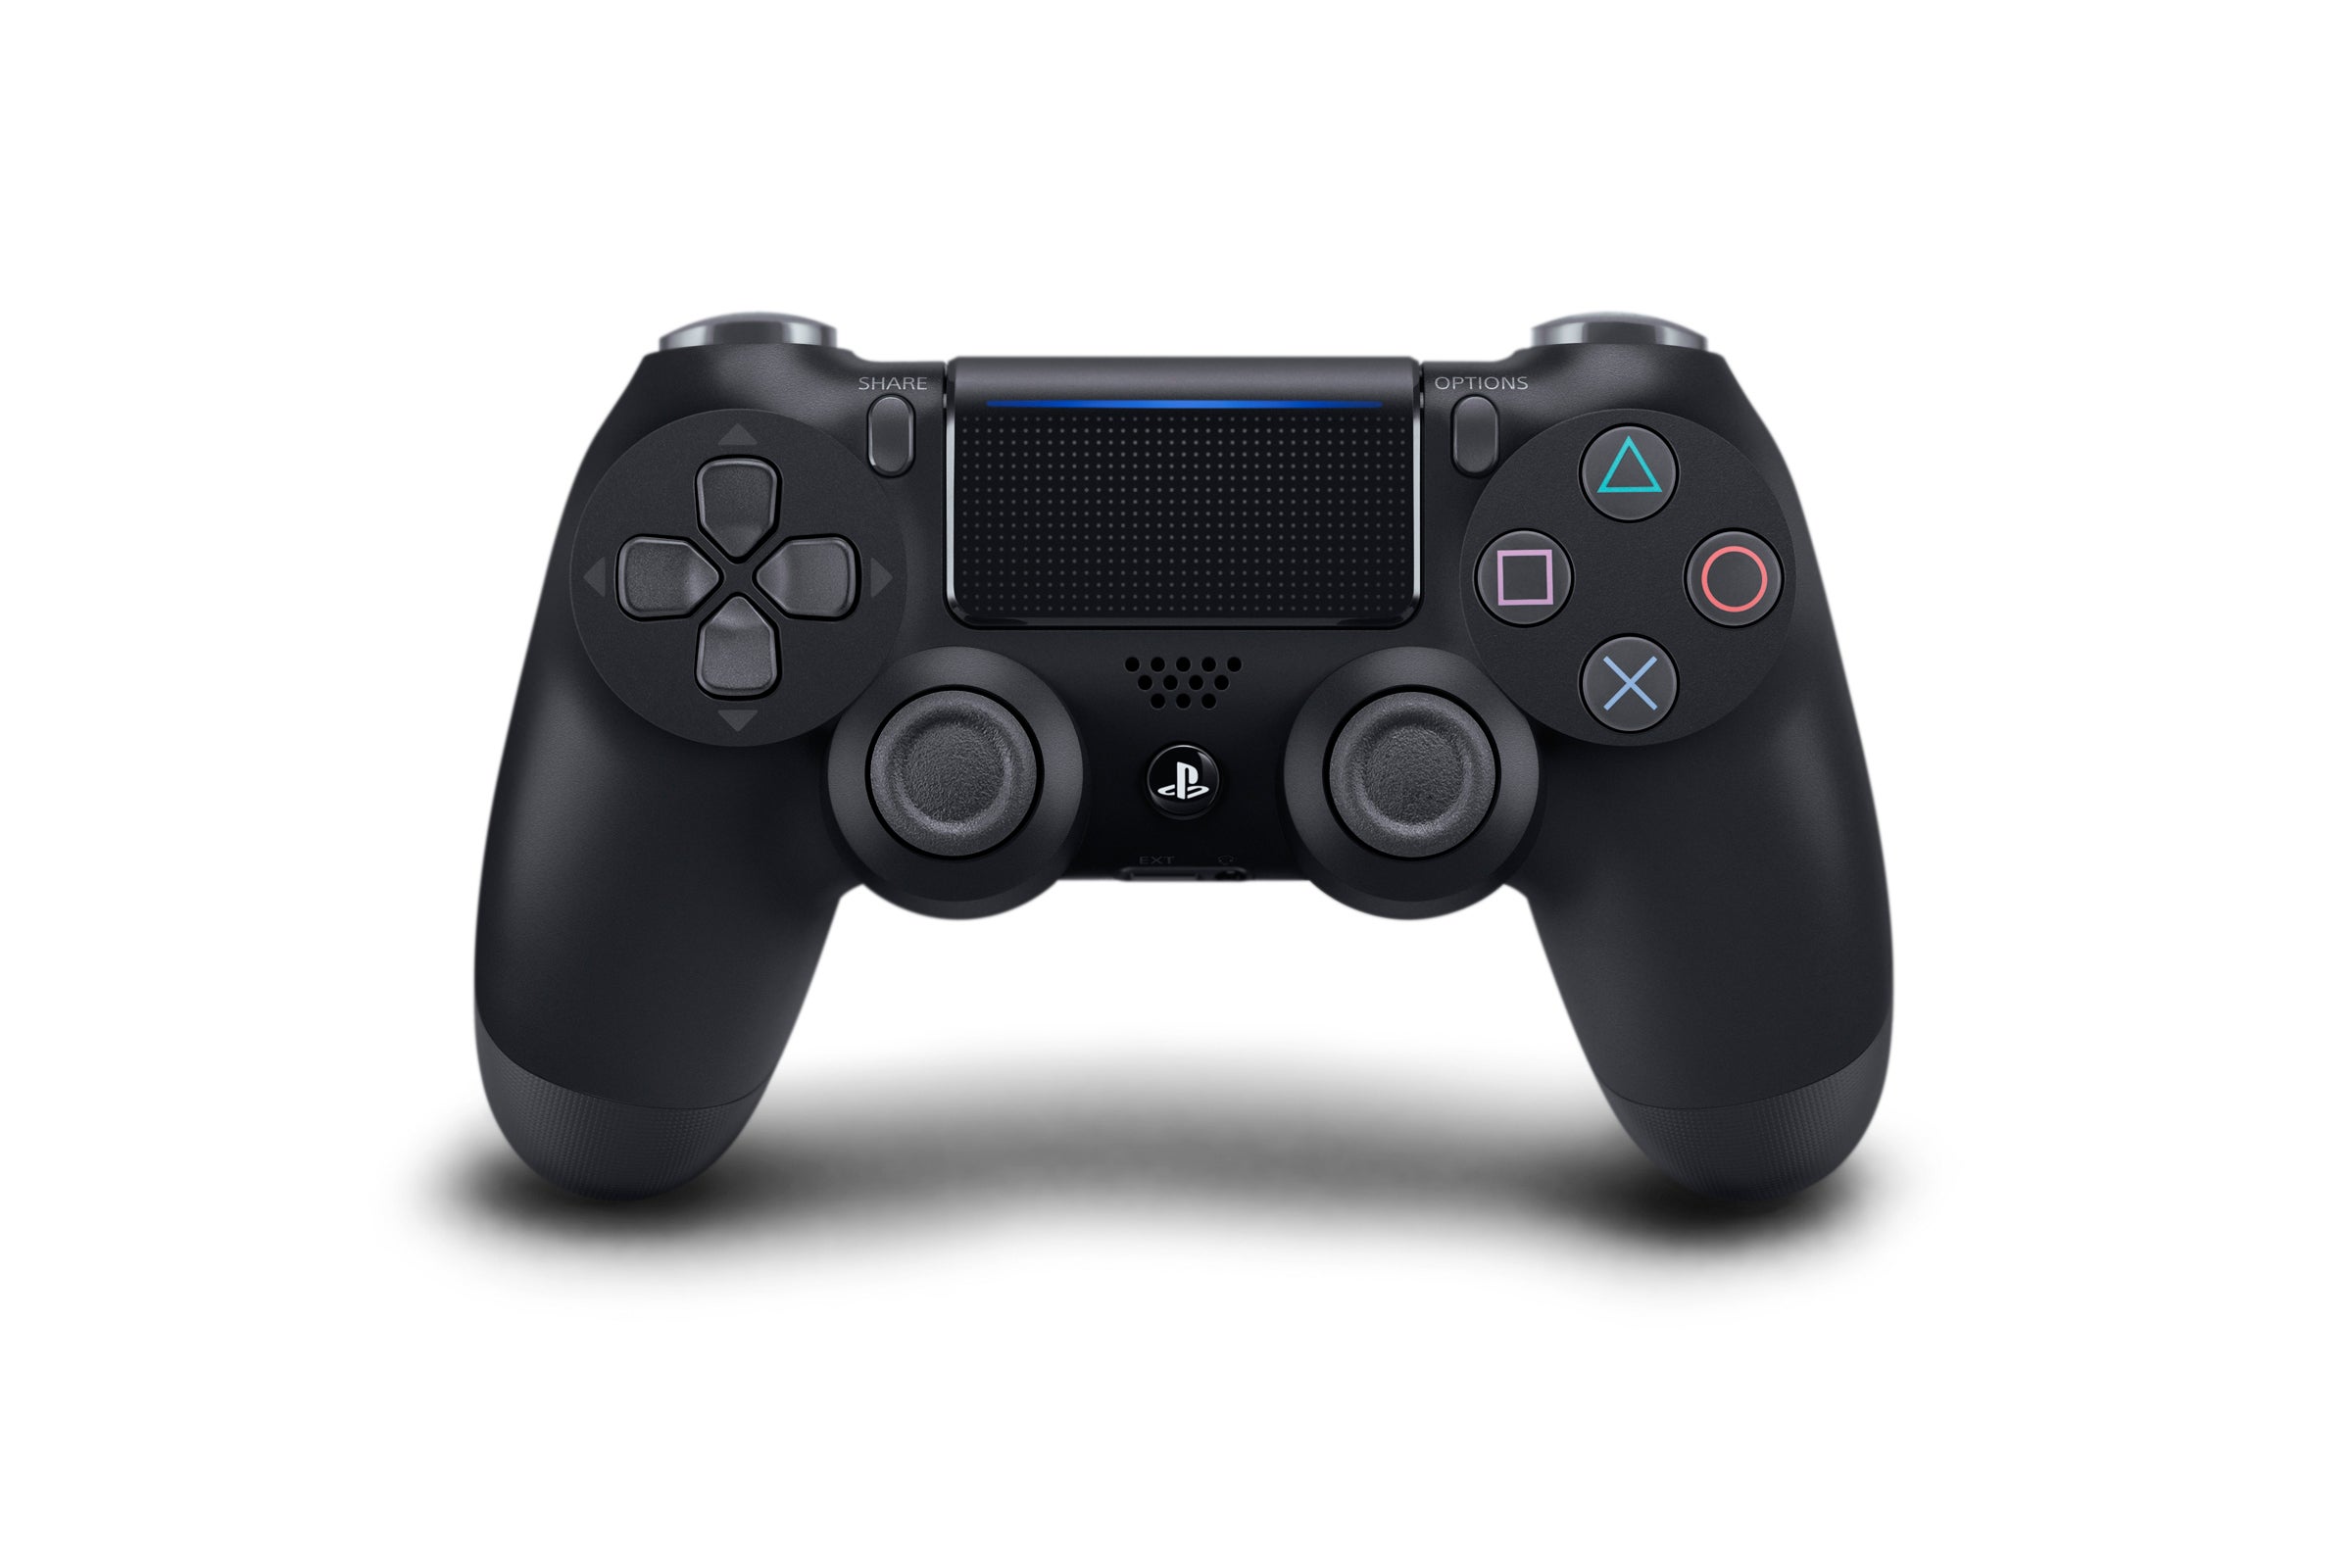 PS4 Slim release date, price, specs, new DualShock 4 and 